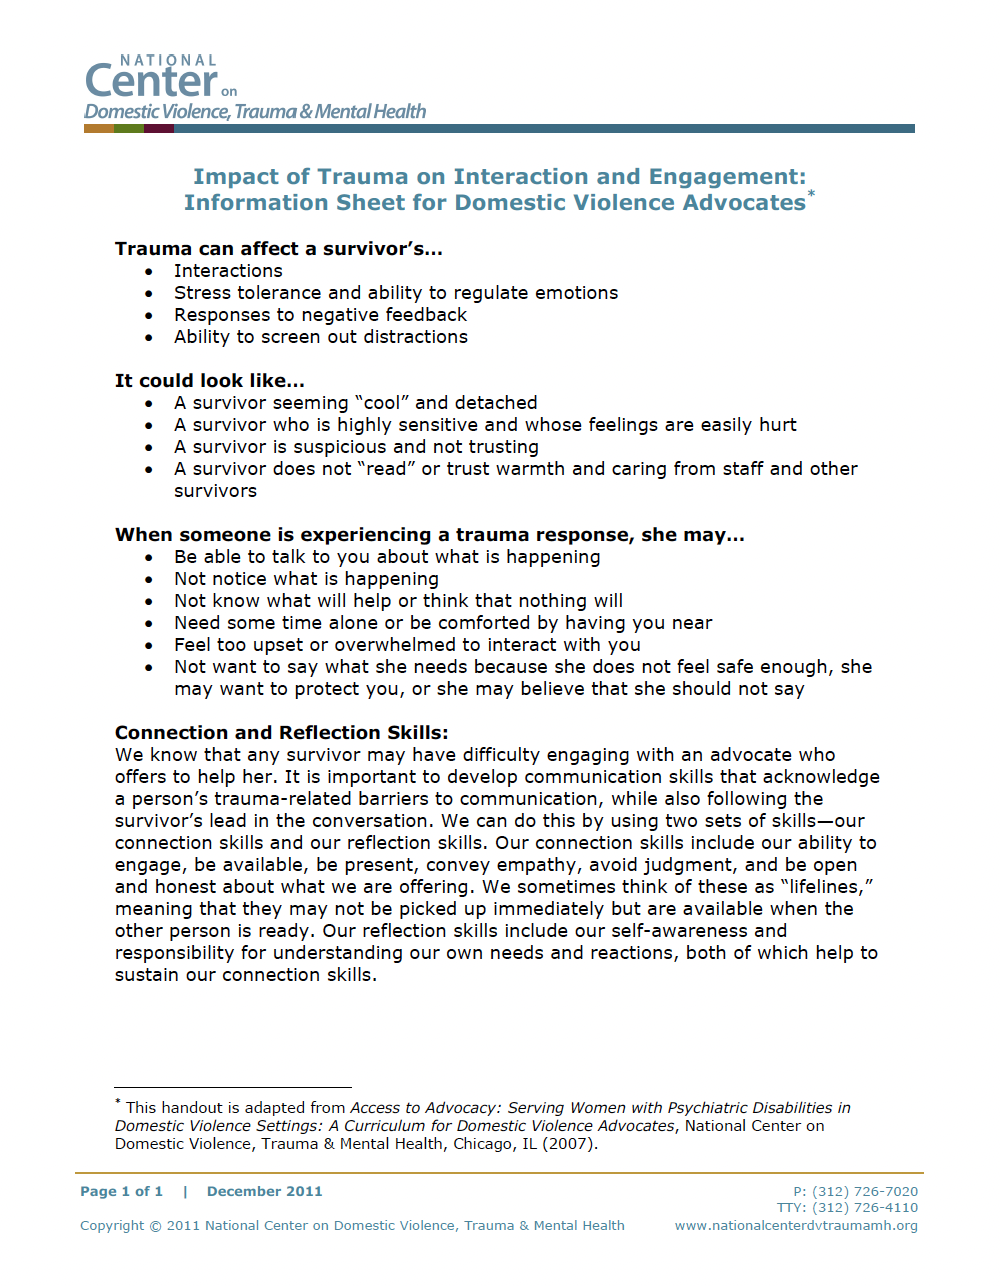 The document is an information sheet for domestic violence advocates about the impact of trauma on survivor's interactions and engagement.